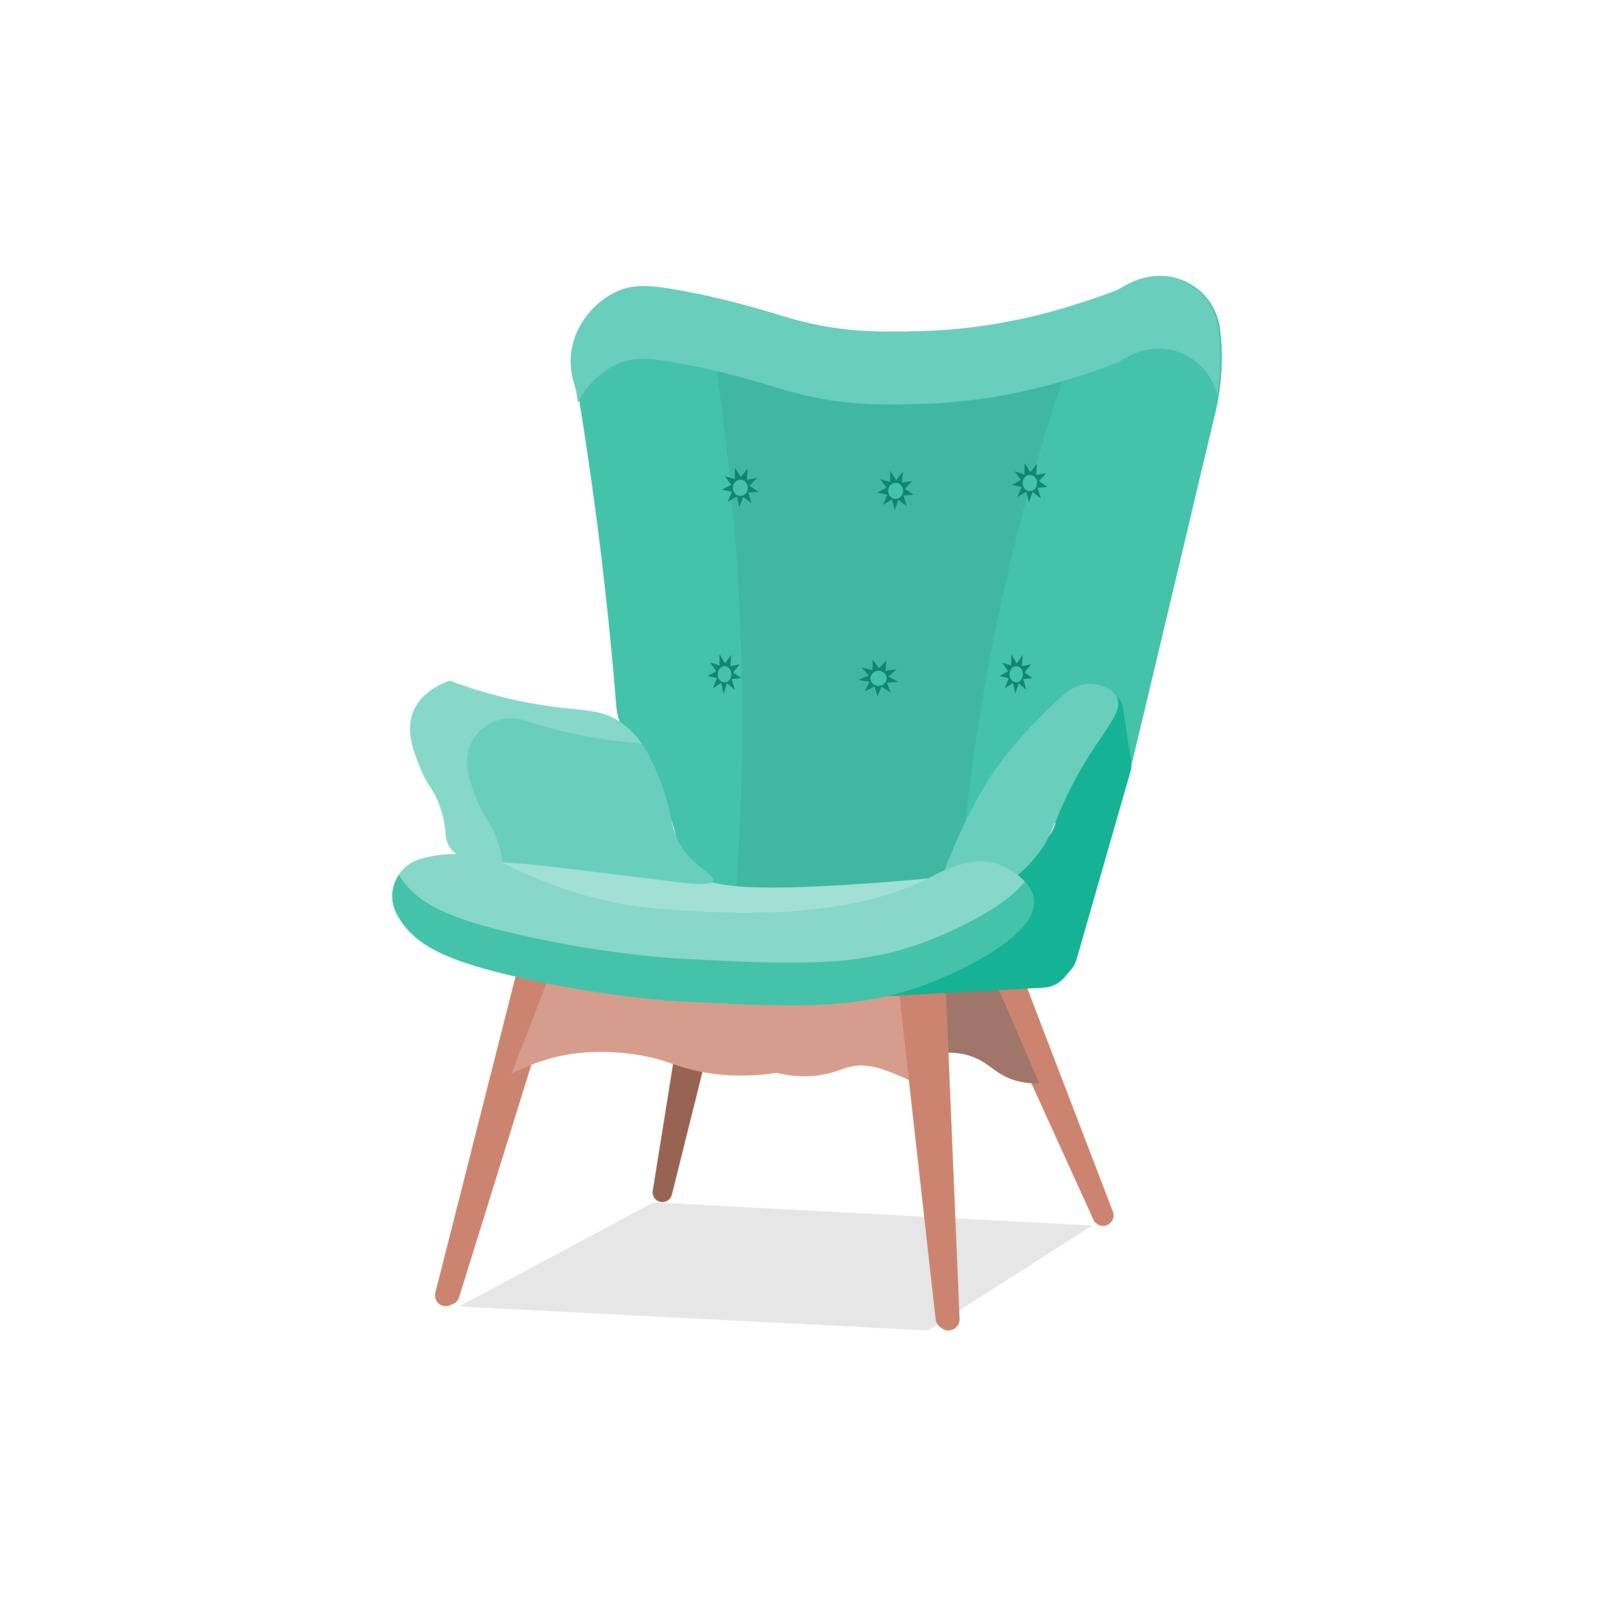 Stylish trendy model of an armchair in a trendy green color with armrests on wooden legs. Isolated vector illustration of cozy interior item in cartoon flat style.